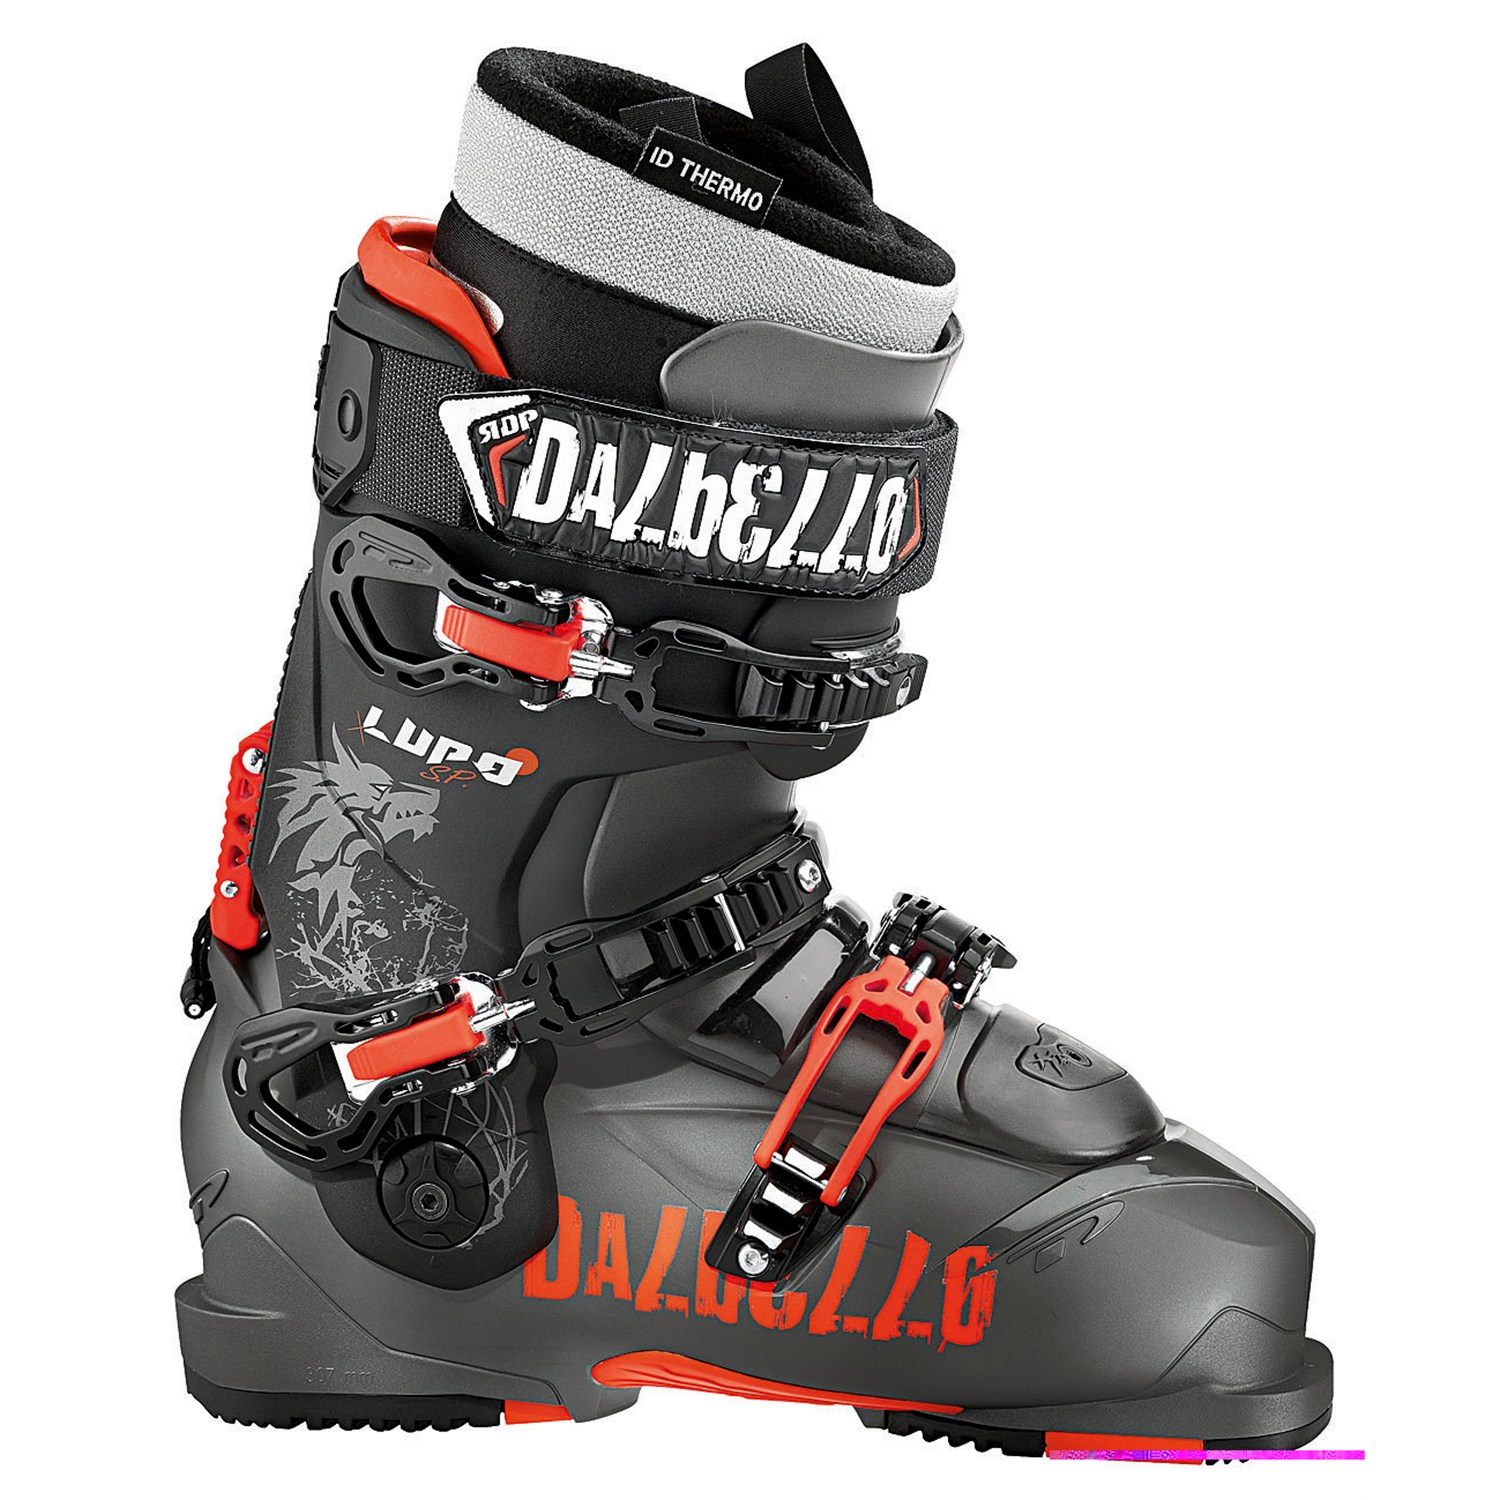 Sam Shaheen reviews the Dalbello Lupo for Blister Gear Review